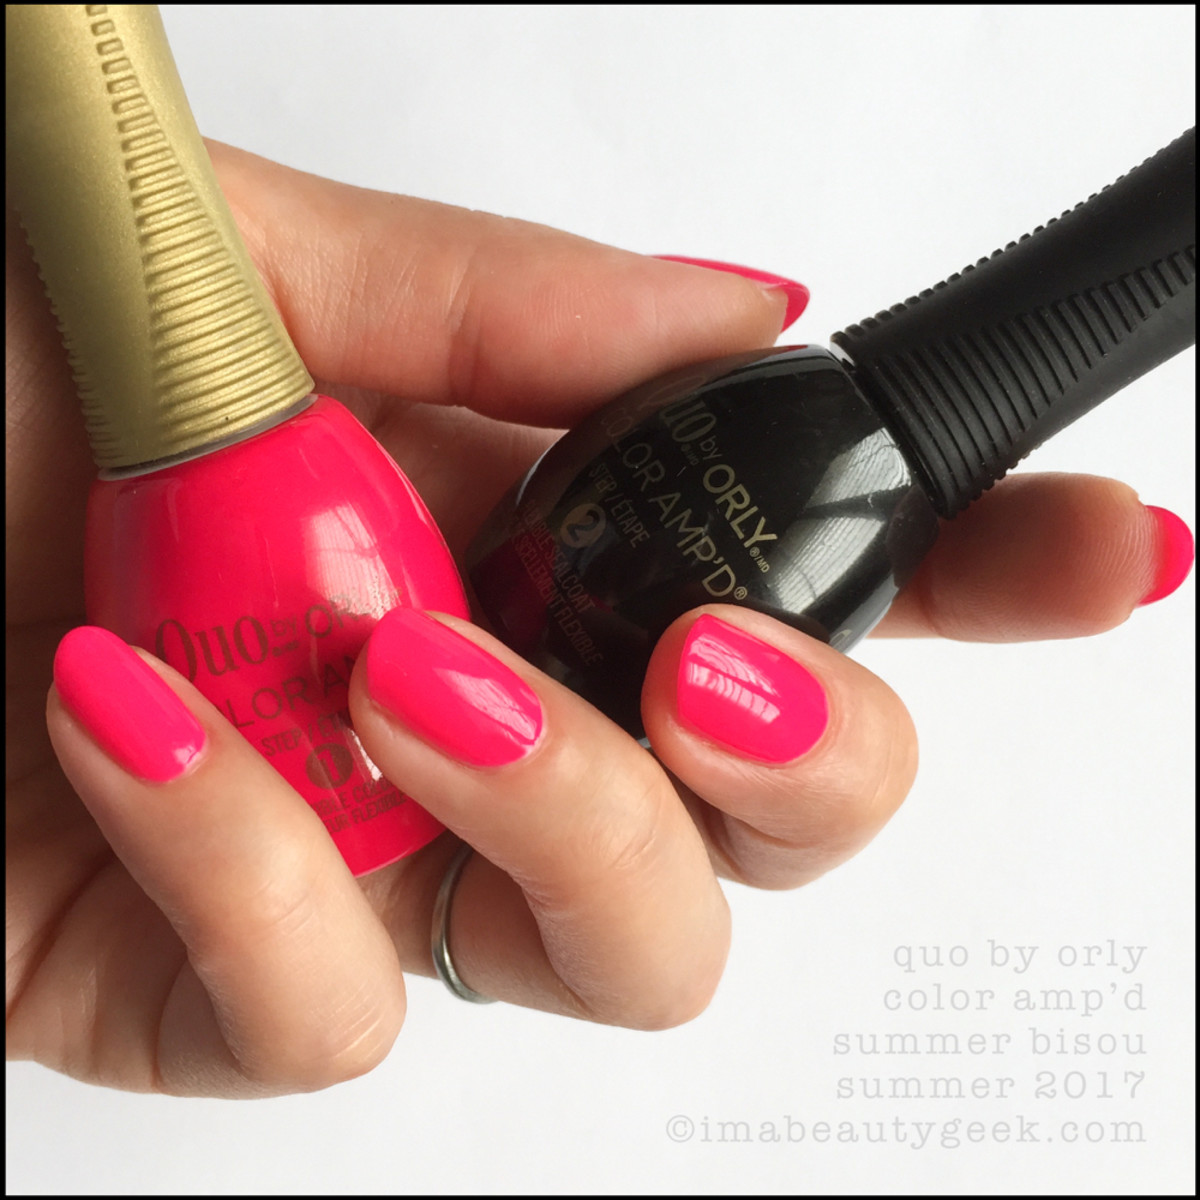 Quo by Orly Color Amp'd Summer Bisou 2017